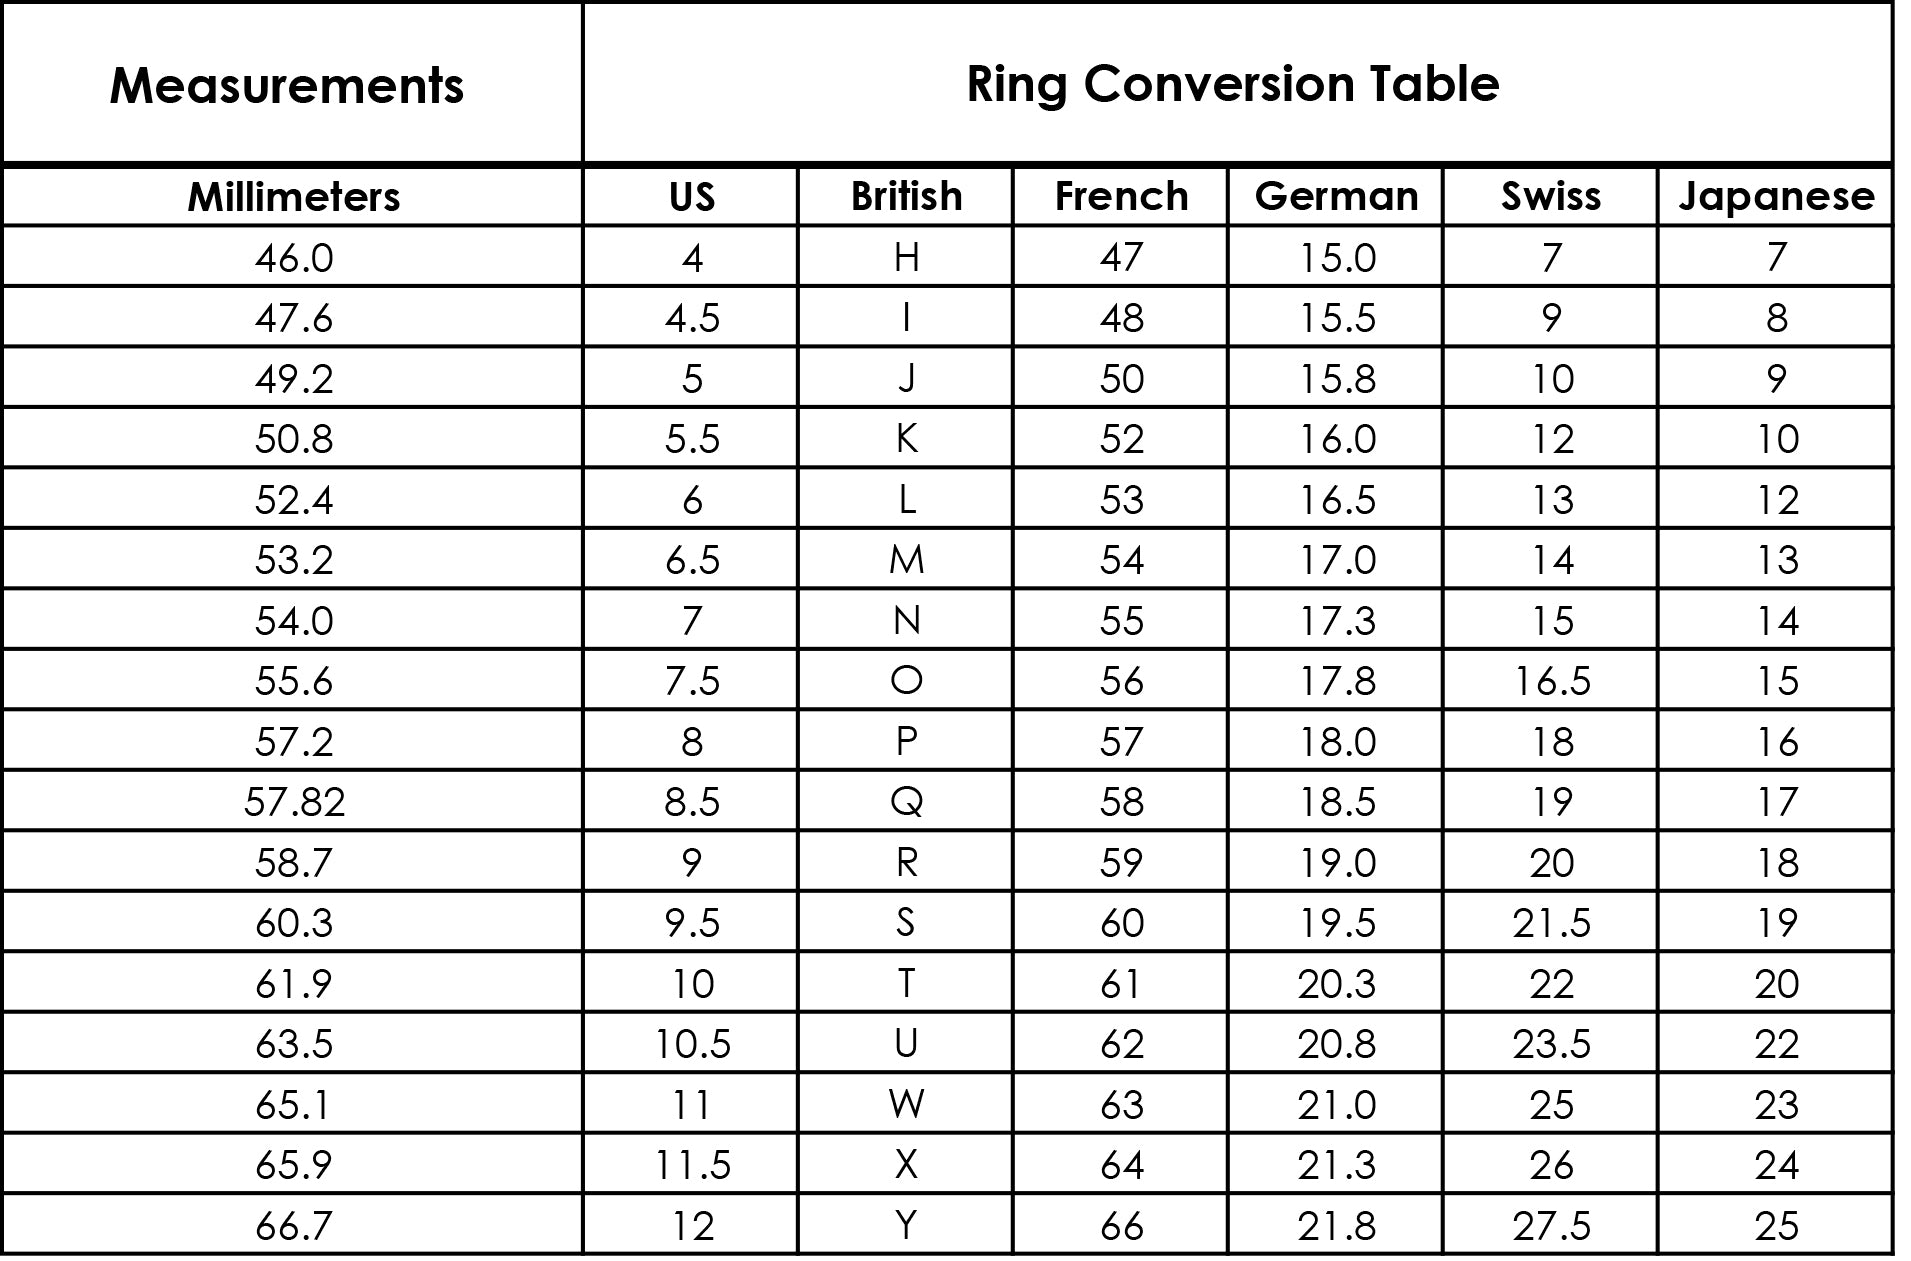 String Ring Size Chart